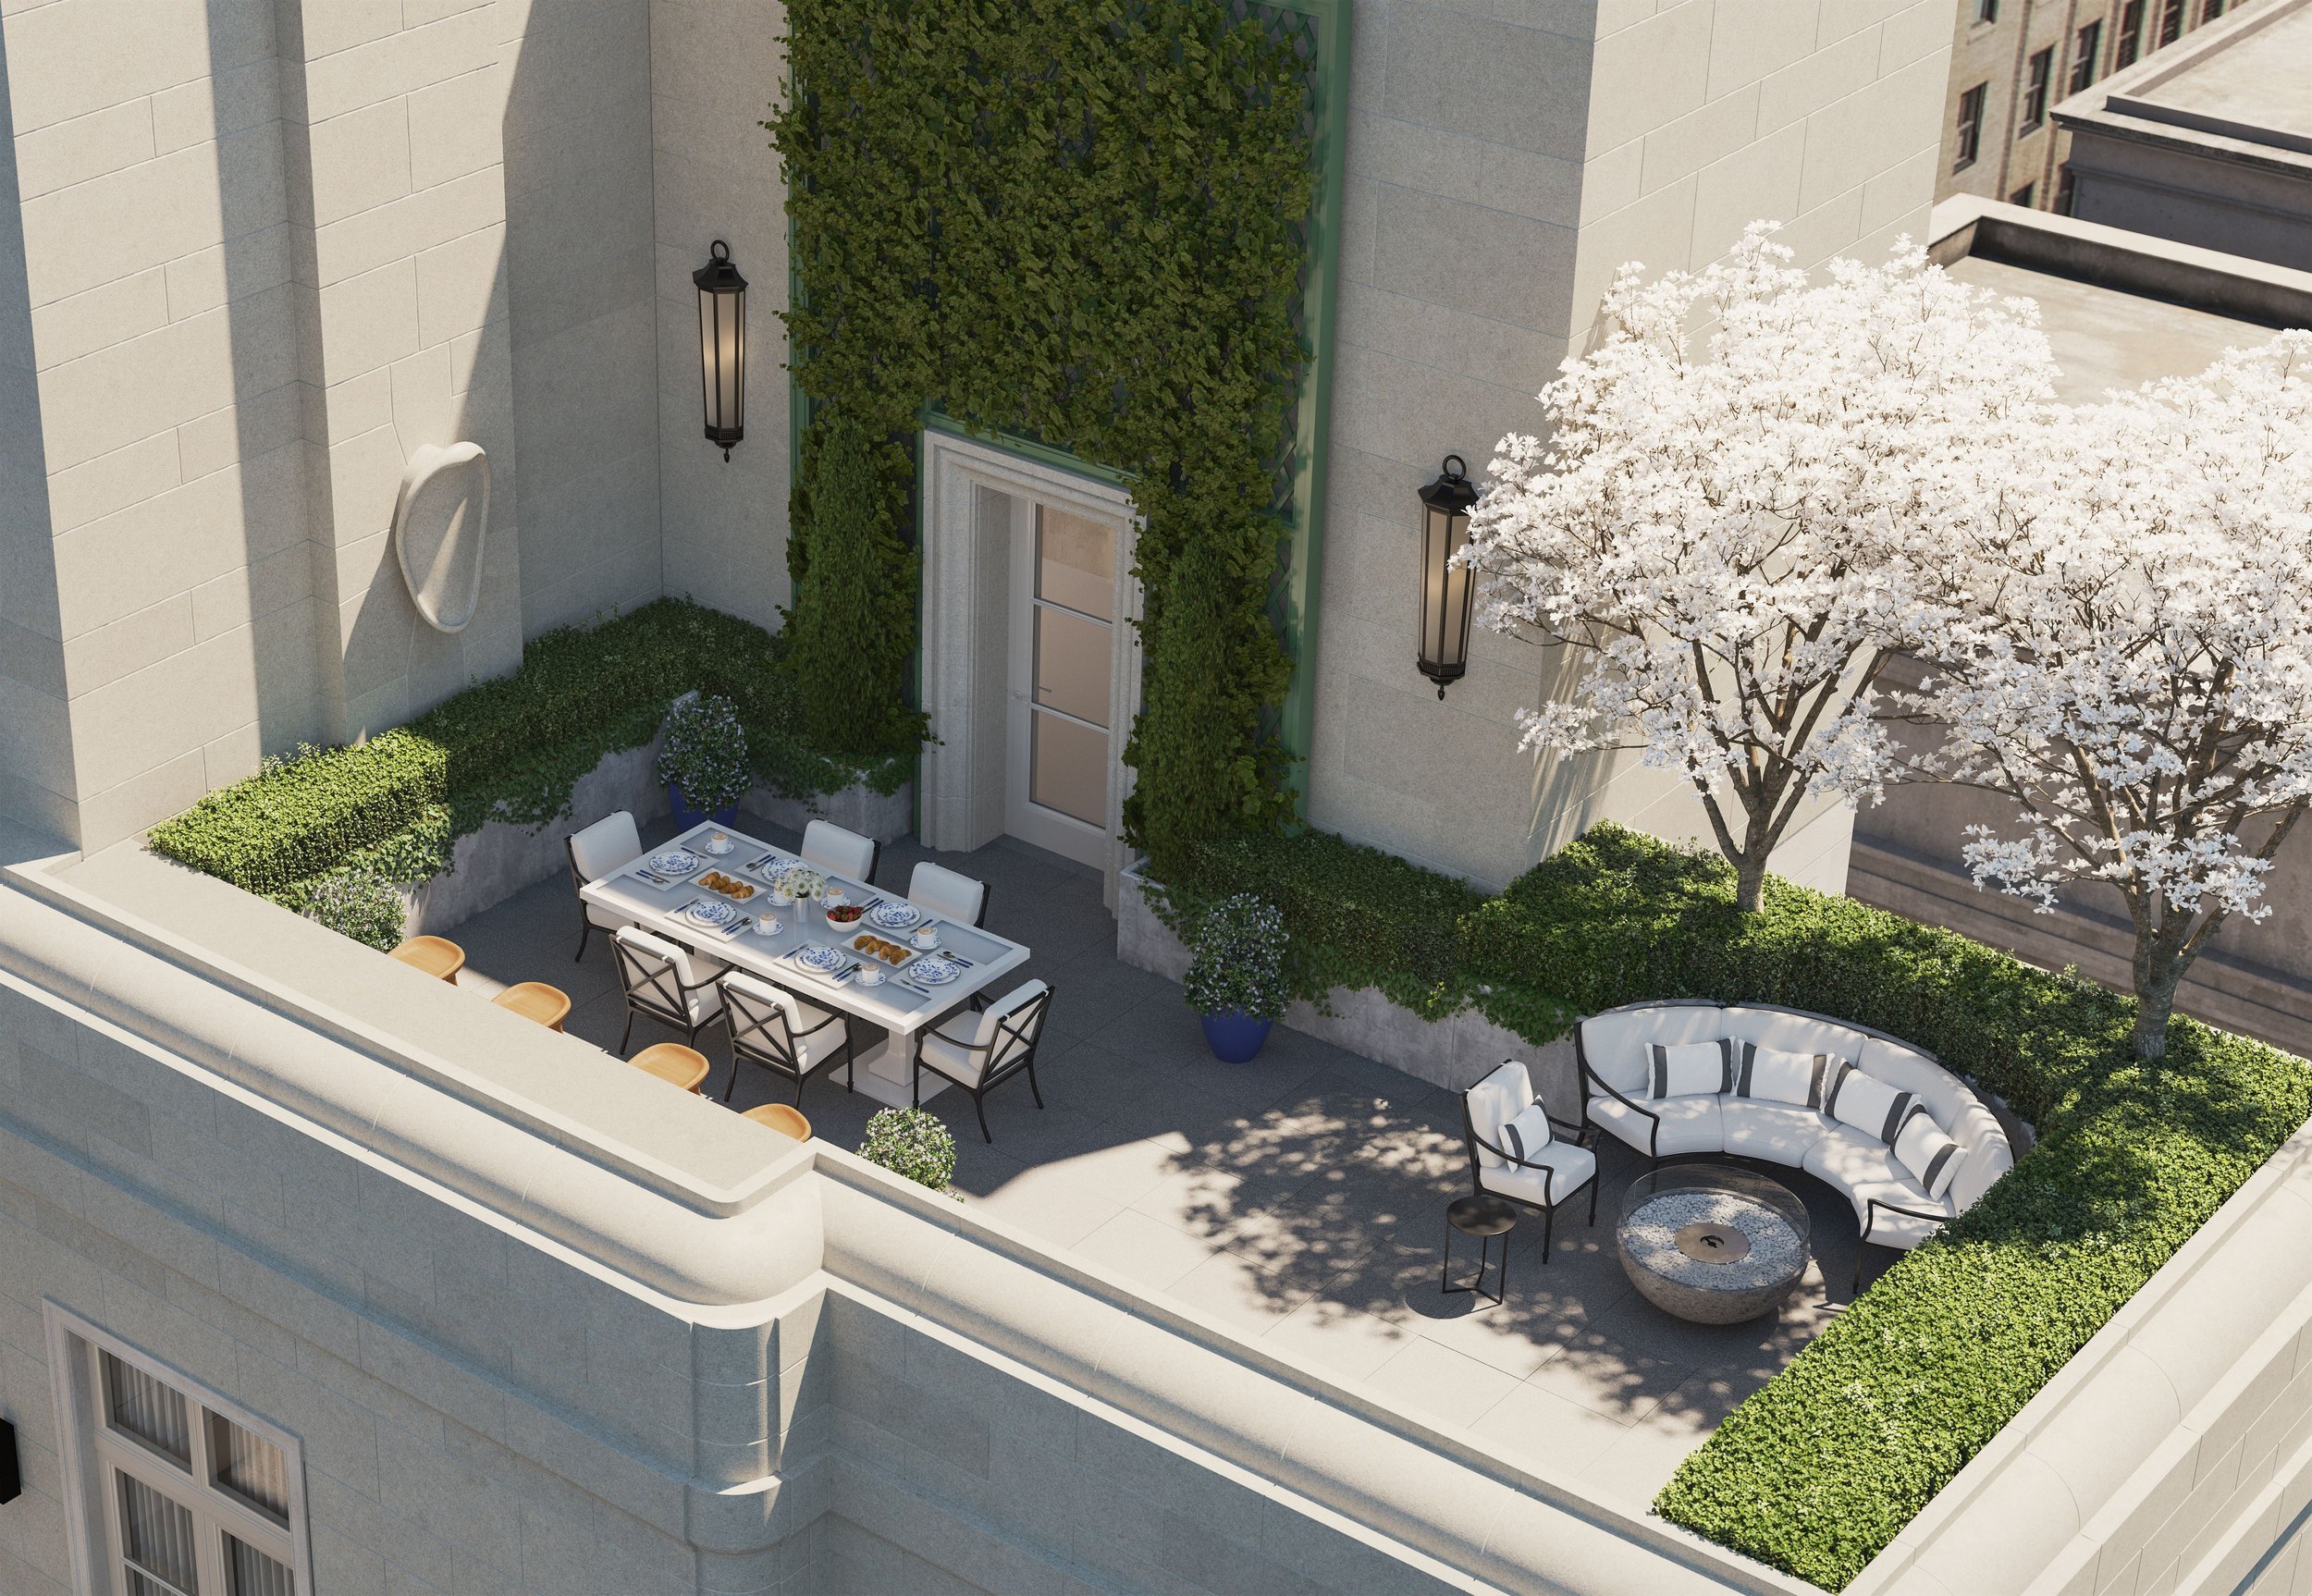  Residents of The Bellemont enjoy a generous array of amenities for wellness, leisure and entertainment. The offering includes a state-of-the-art fitness center, a private cinema with a wet bar, an inspired children’s playroom, a regulation squash co